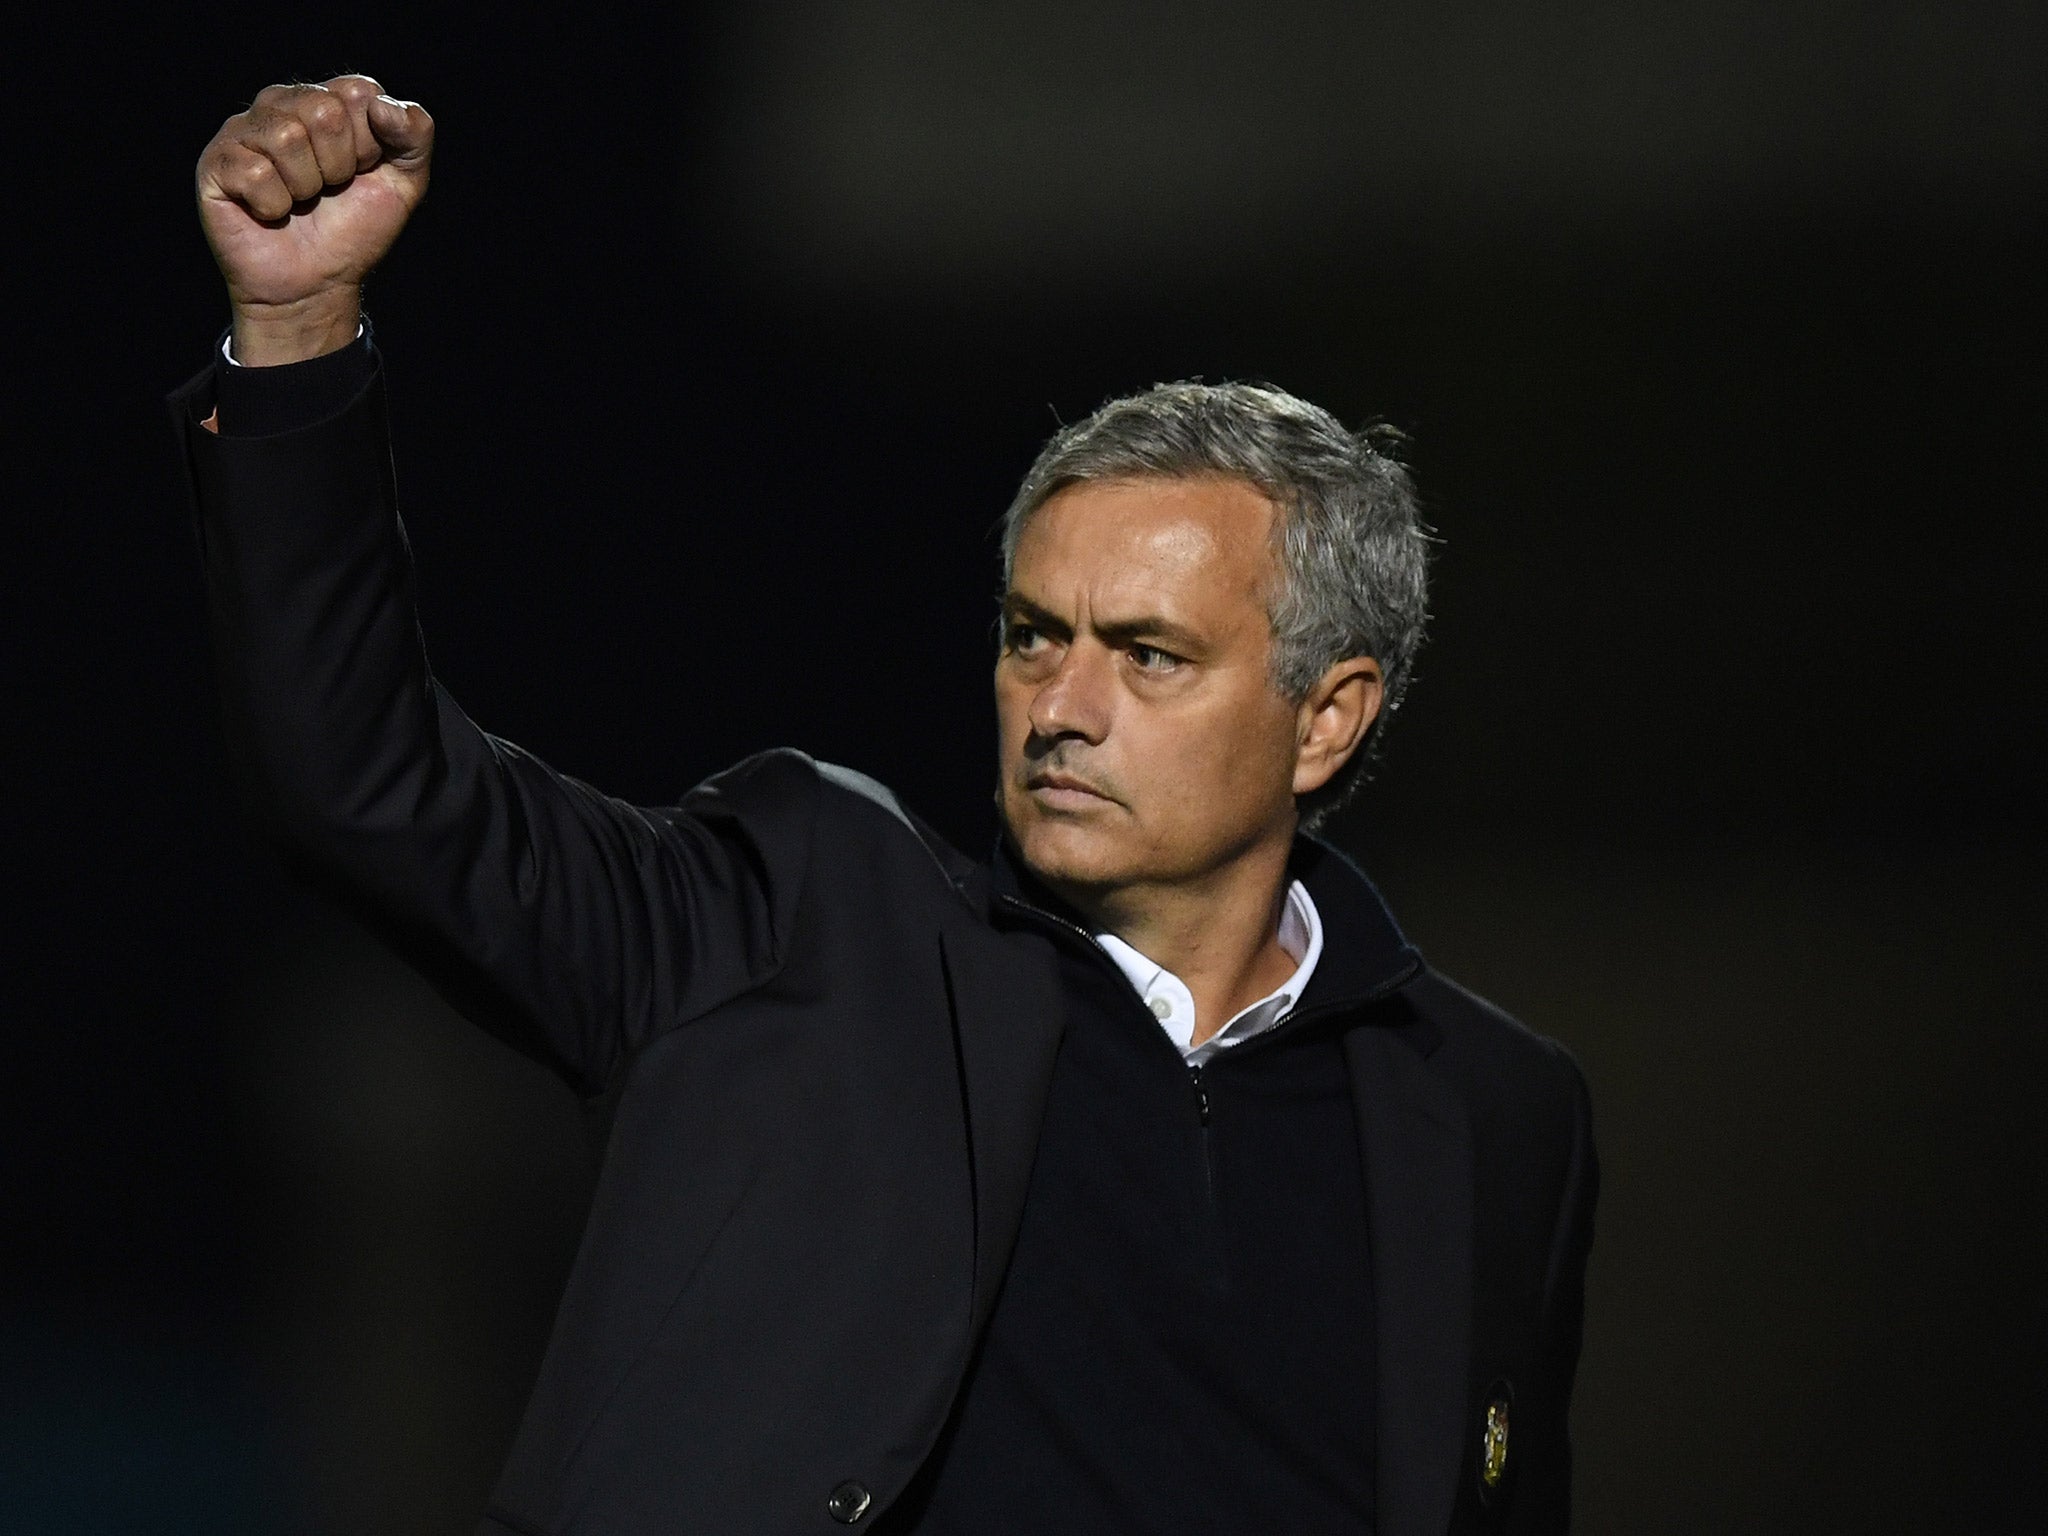 Mourinho celebrated United's first victory in four matches in front of the away fans